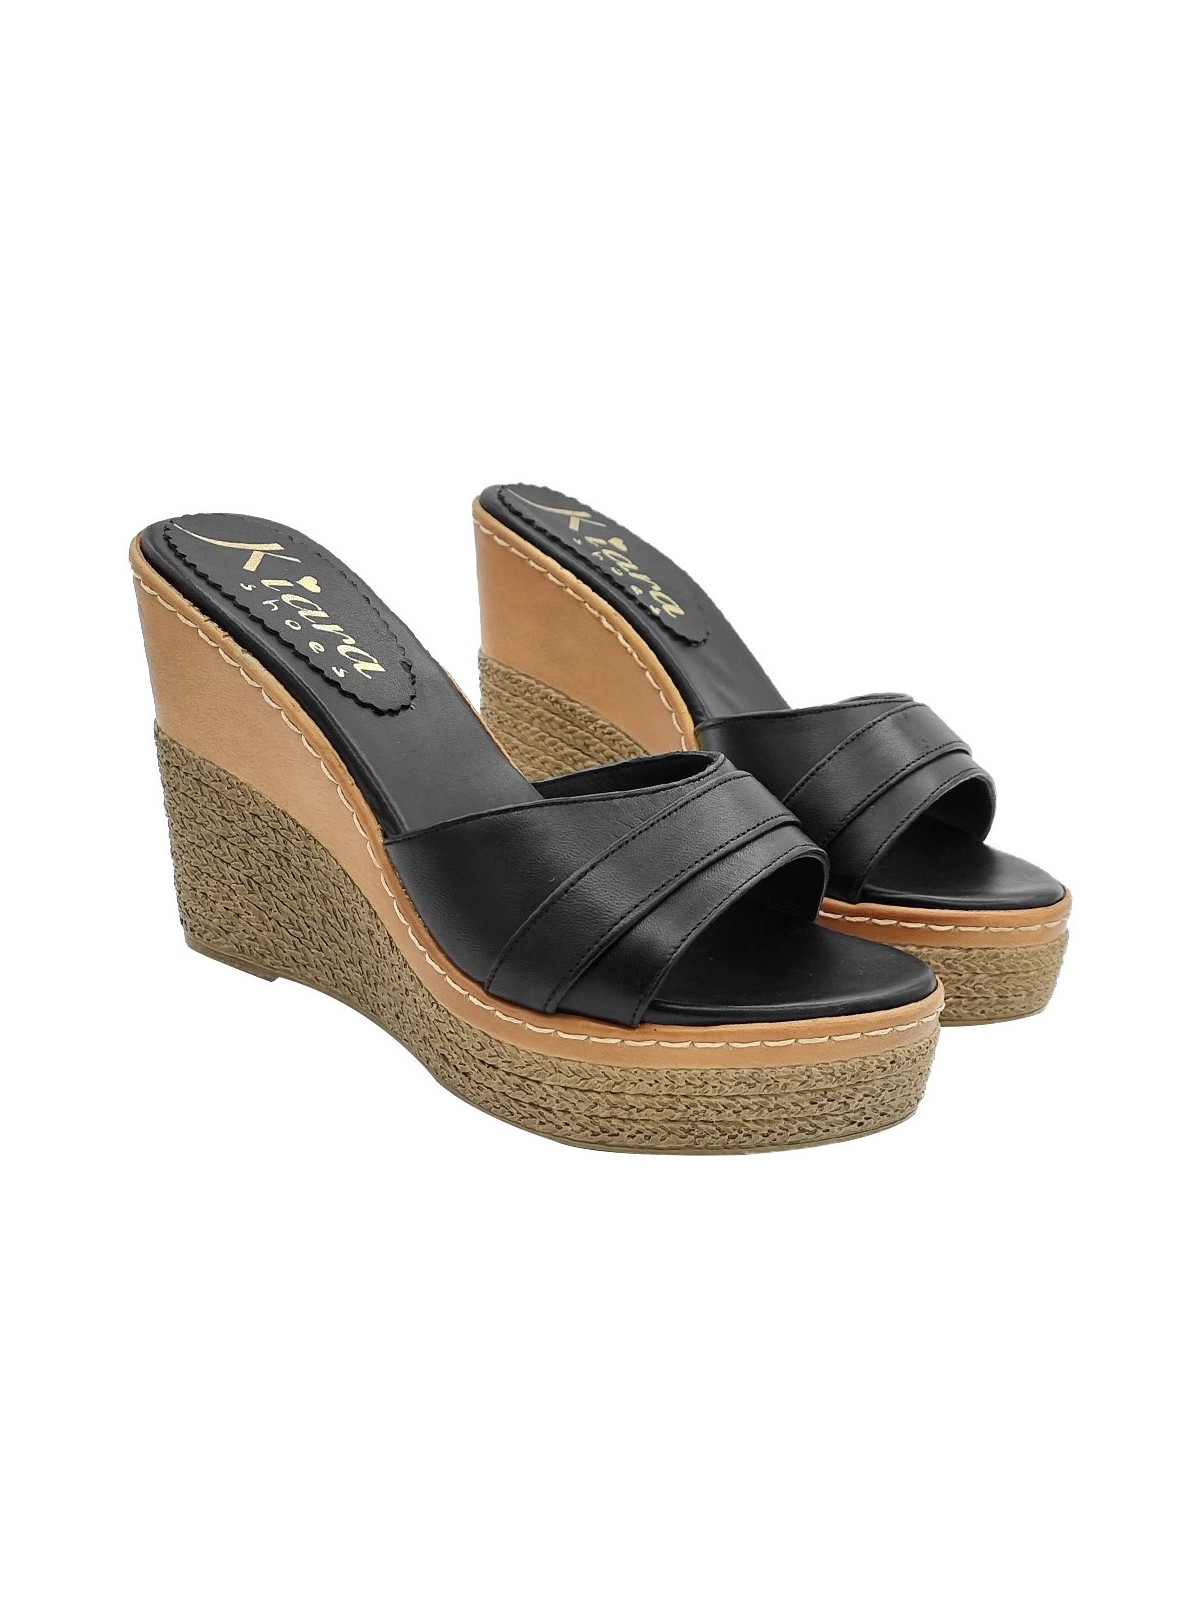 WOMEN'S BLACK LEATHER WEDGES WITH HEEL 11